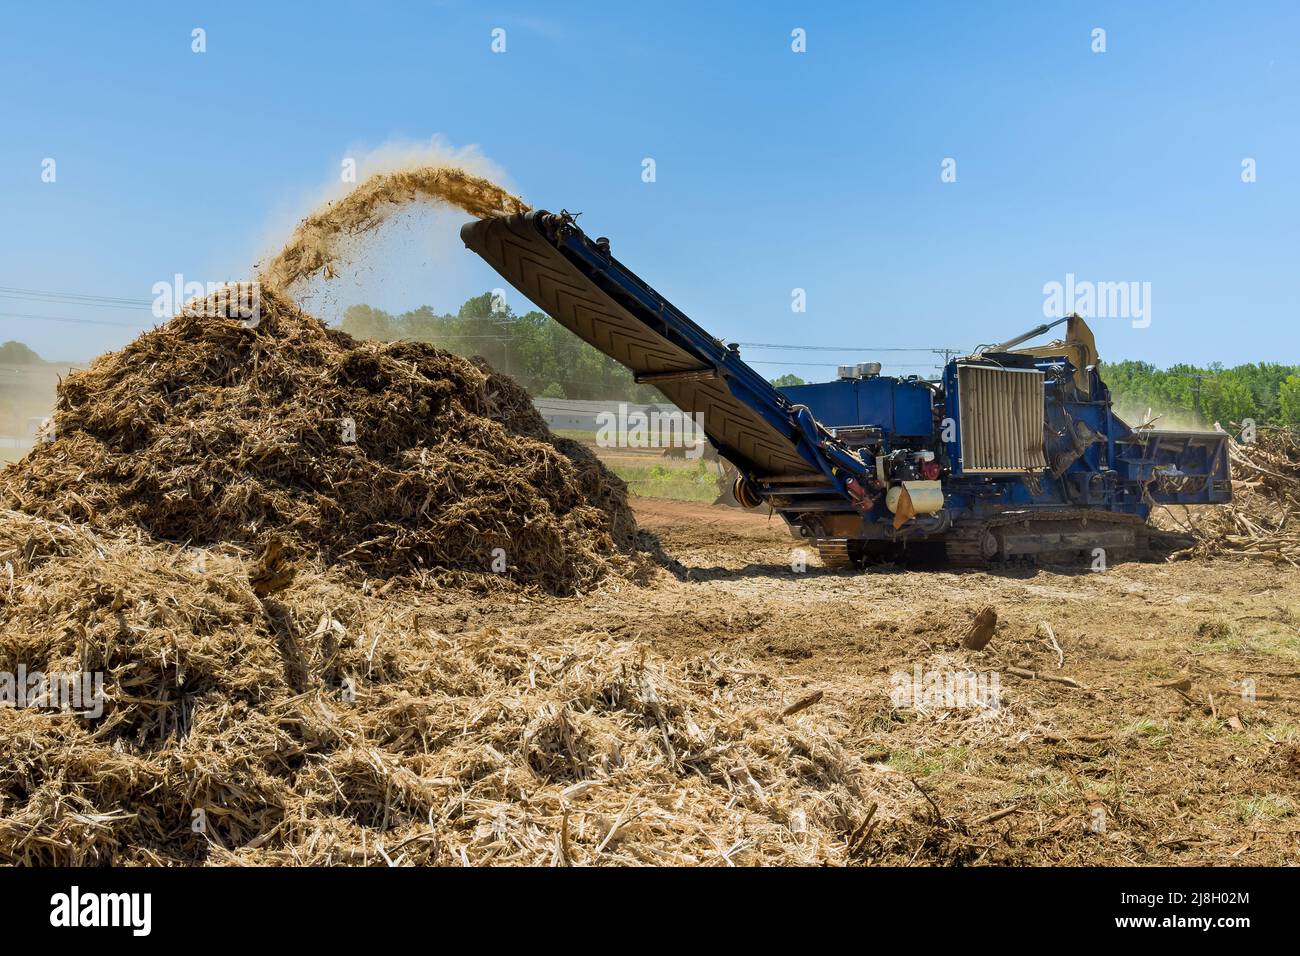 Roots crush branches with a chipper shredder or wood chipper machine Stock Photo